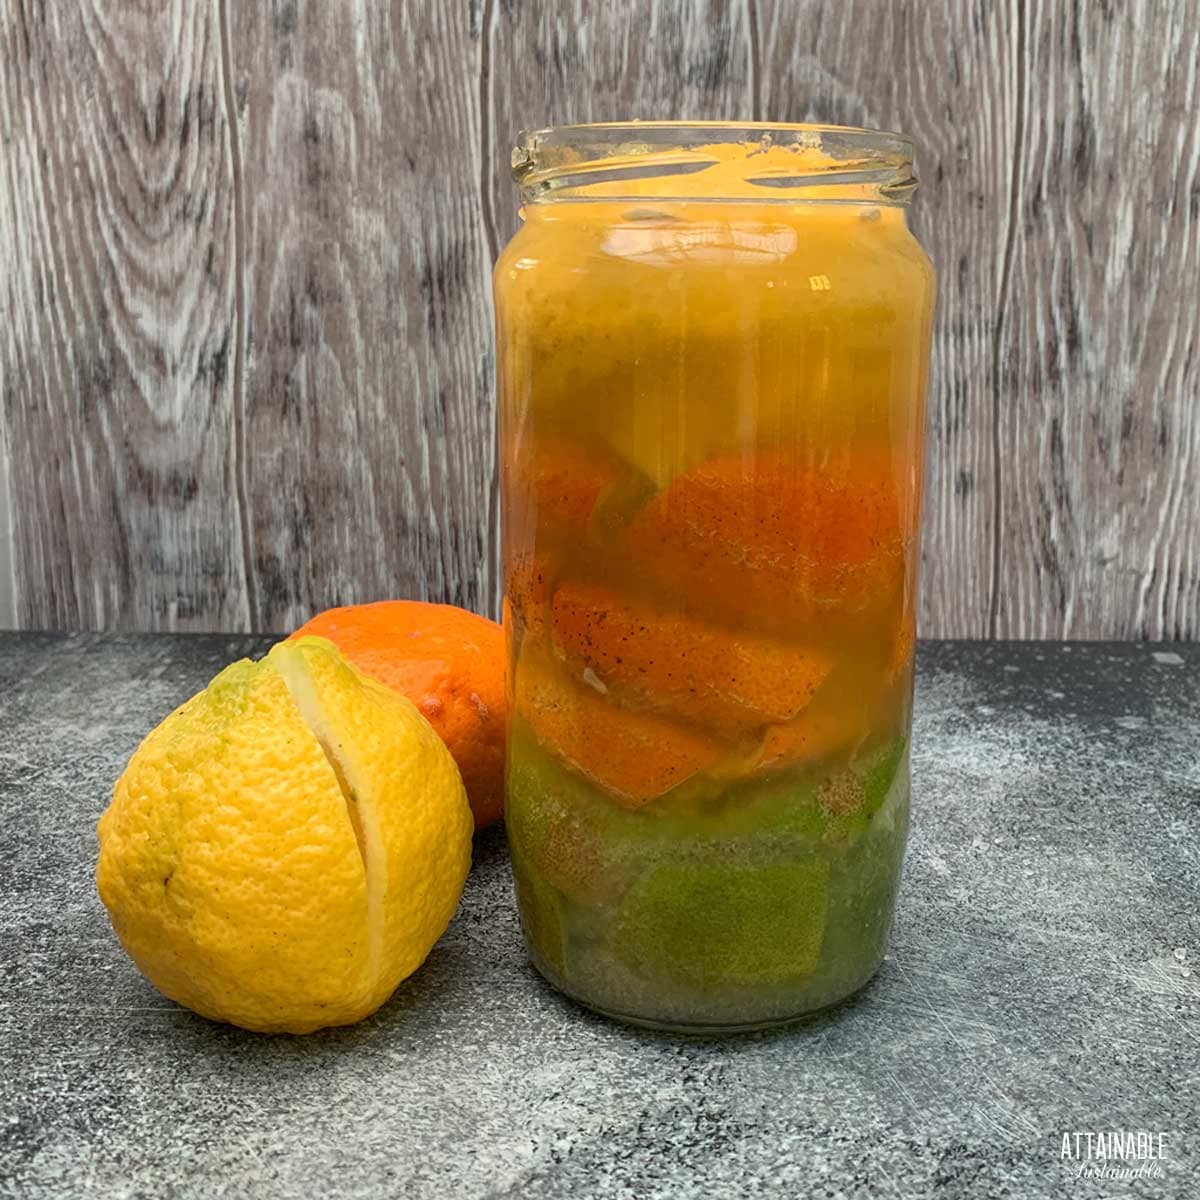 jar with limes, oranges, and lemons under liquid for fermenting.